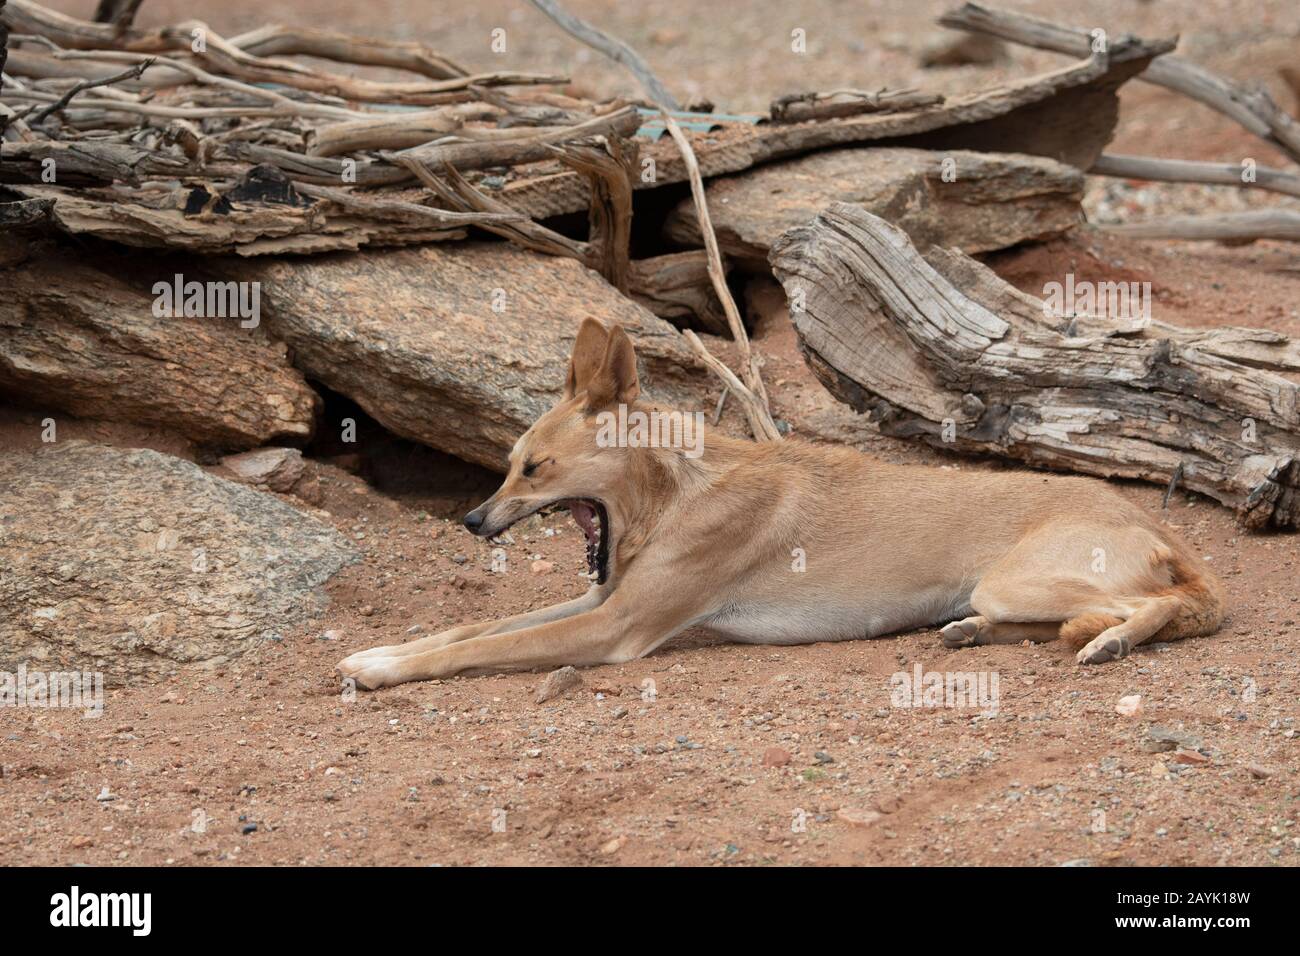 Dingo lying down and yawning (Canis familiaris dingo or Canis lupus dingo) Stock Photo